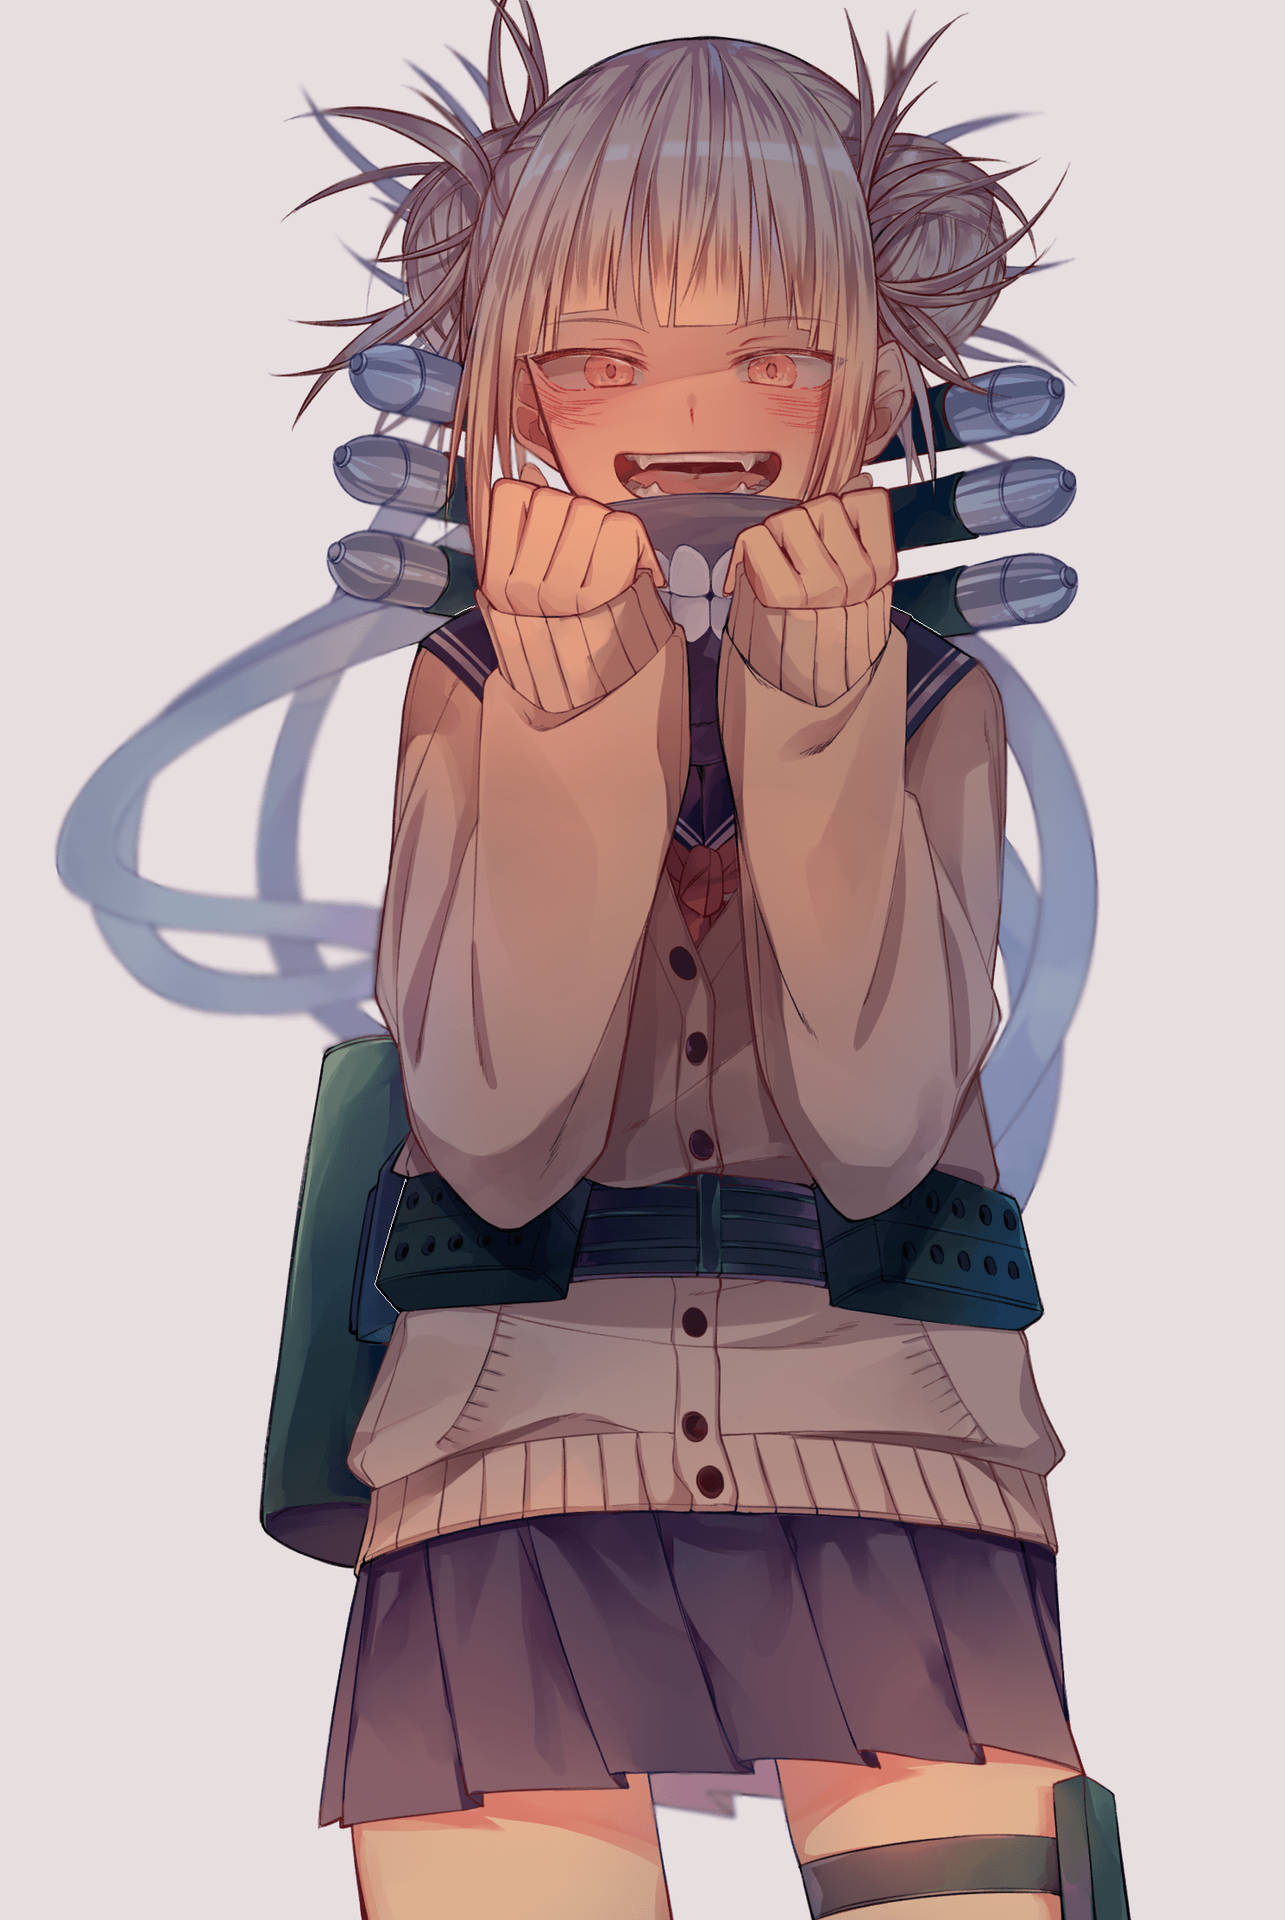 1489X2225 Himiko Toga Wallpaper and Background